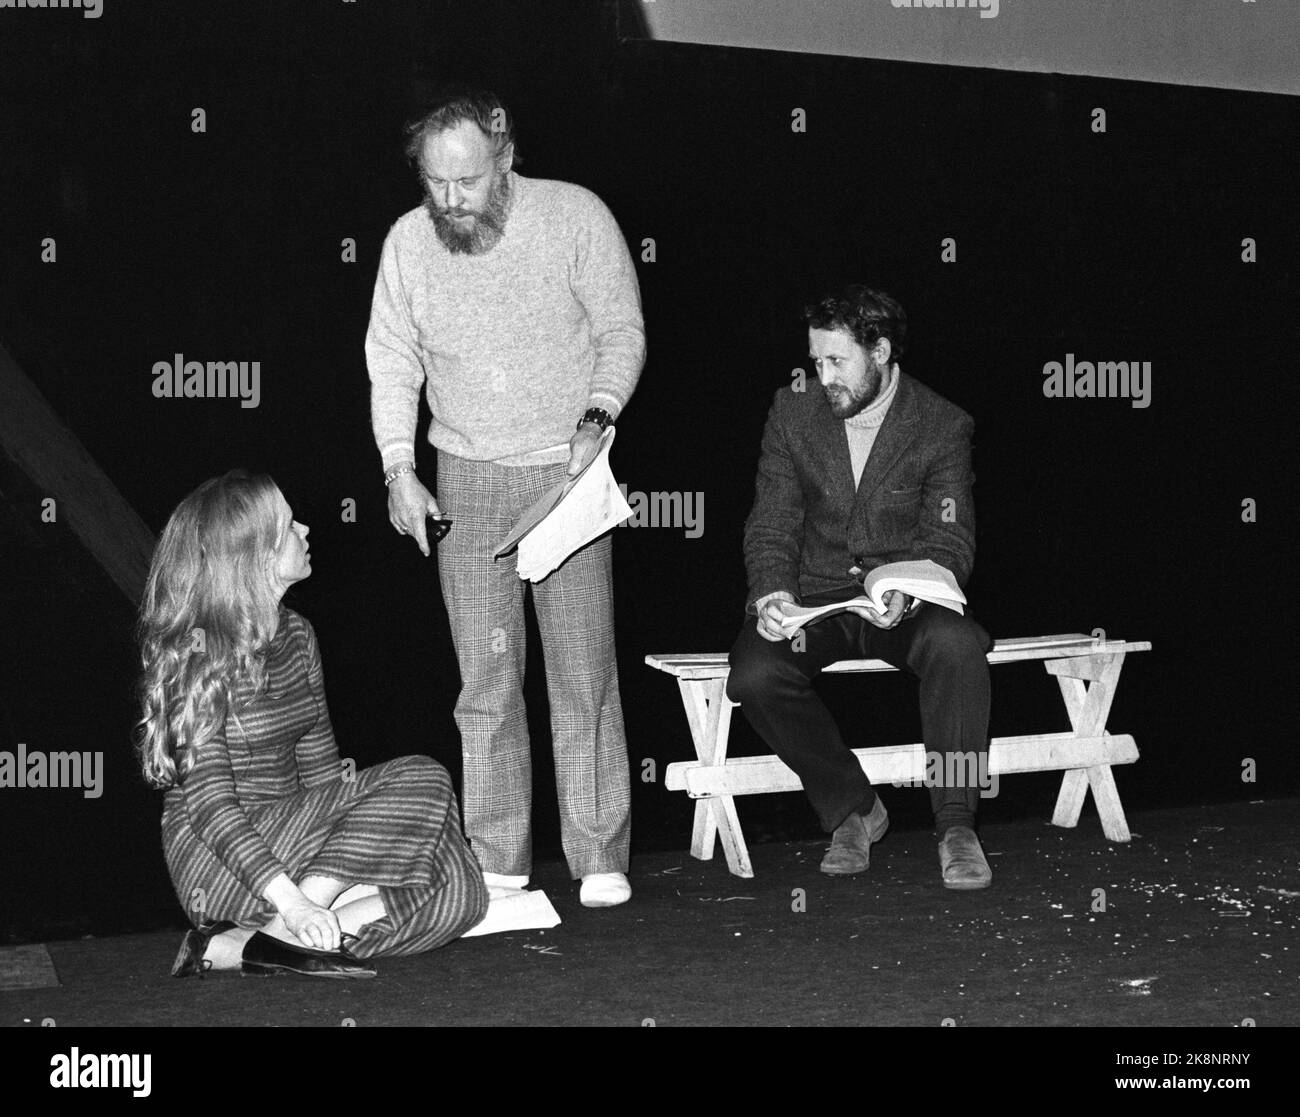 Oslo February 3, 1973. Liv Ullmann is in Norway again. She will now play Agnes in Ibsen's 'Brand' at the Norwegian Theater. Here from the tests at the theater, together with director Bjørn Endreson (in the middle) and co -actor Magnus Tveit, who plays Einar. Theater tests. Script. Theater tests. Photo: Aage Storløkken / Current / NTB Stock Photo